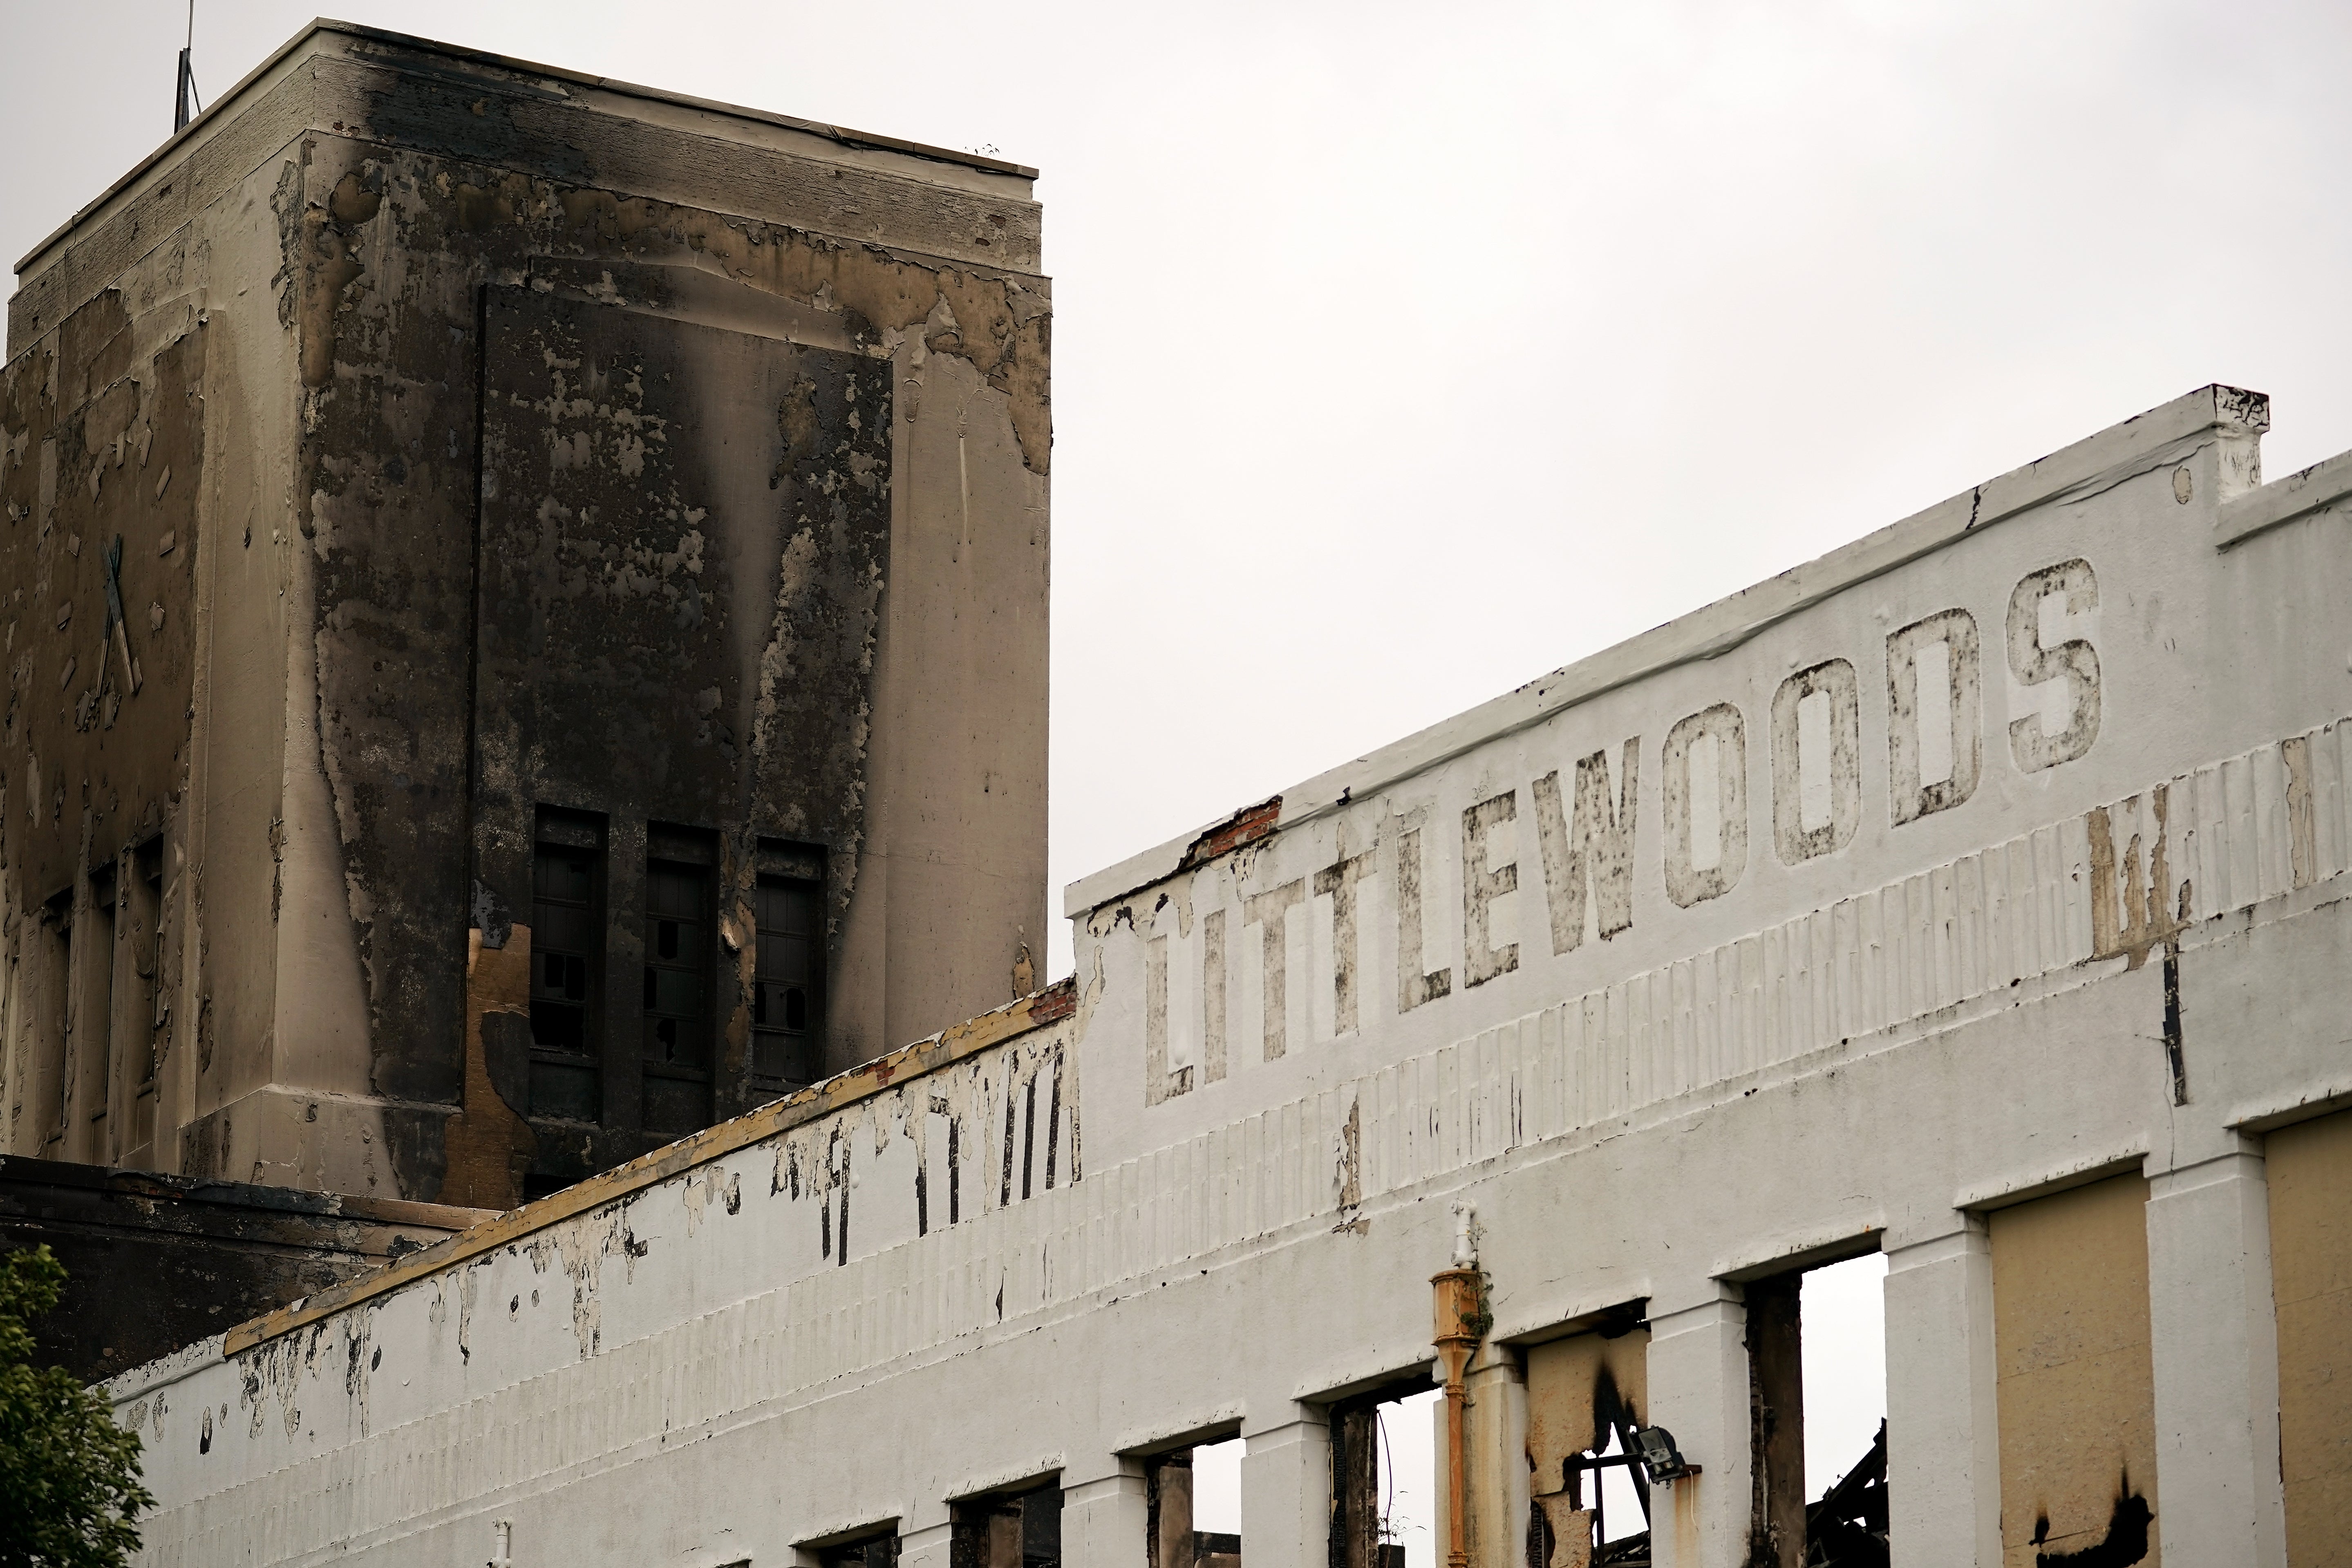 The Littlewoods Pools building, Liverpool, after being ravaged by fire in 2018